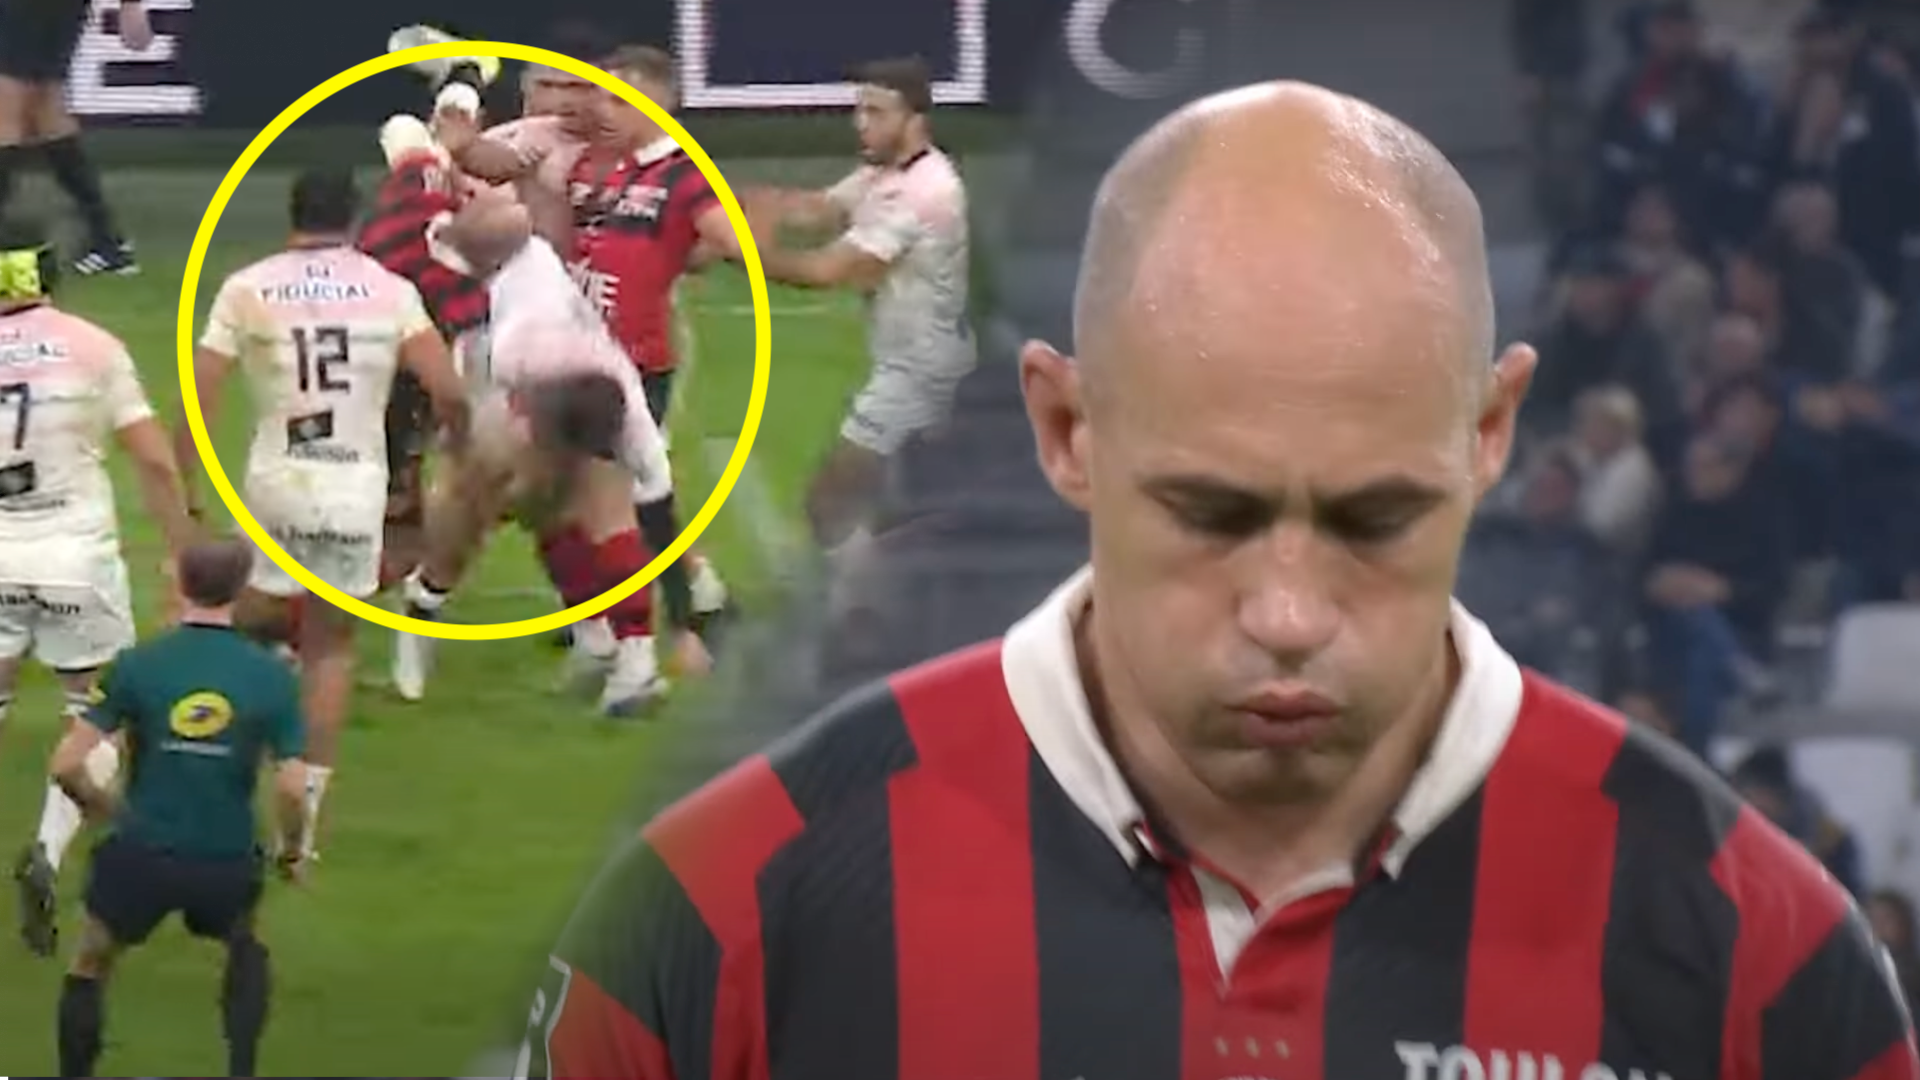 Emotional changing room scenes as Parisse receives career-changing red card